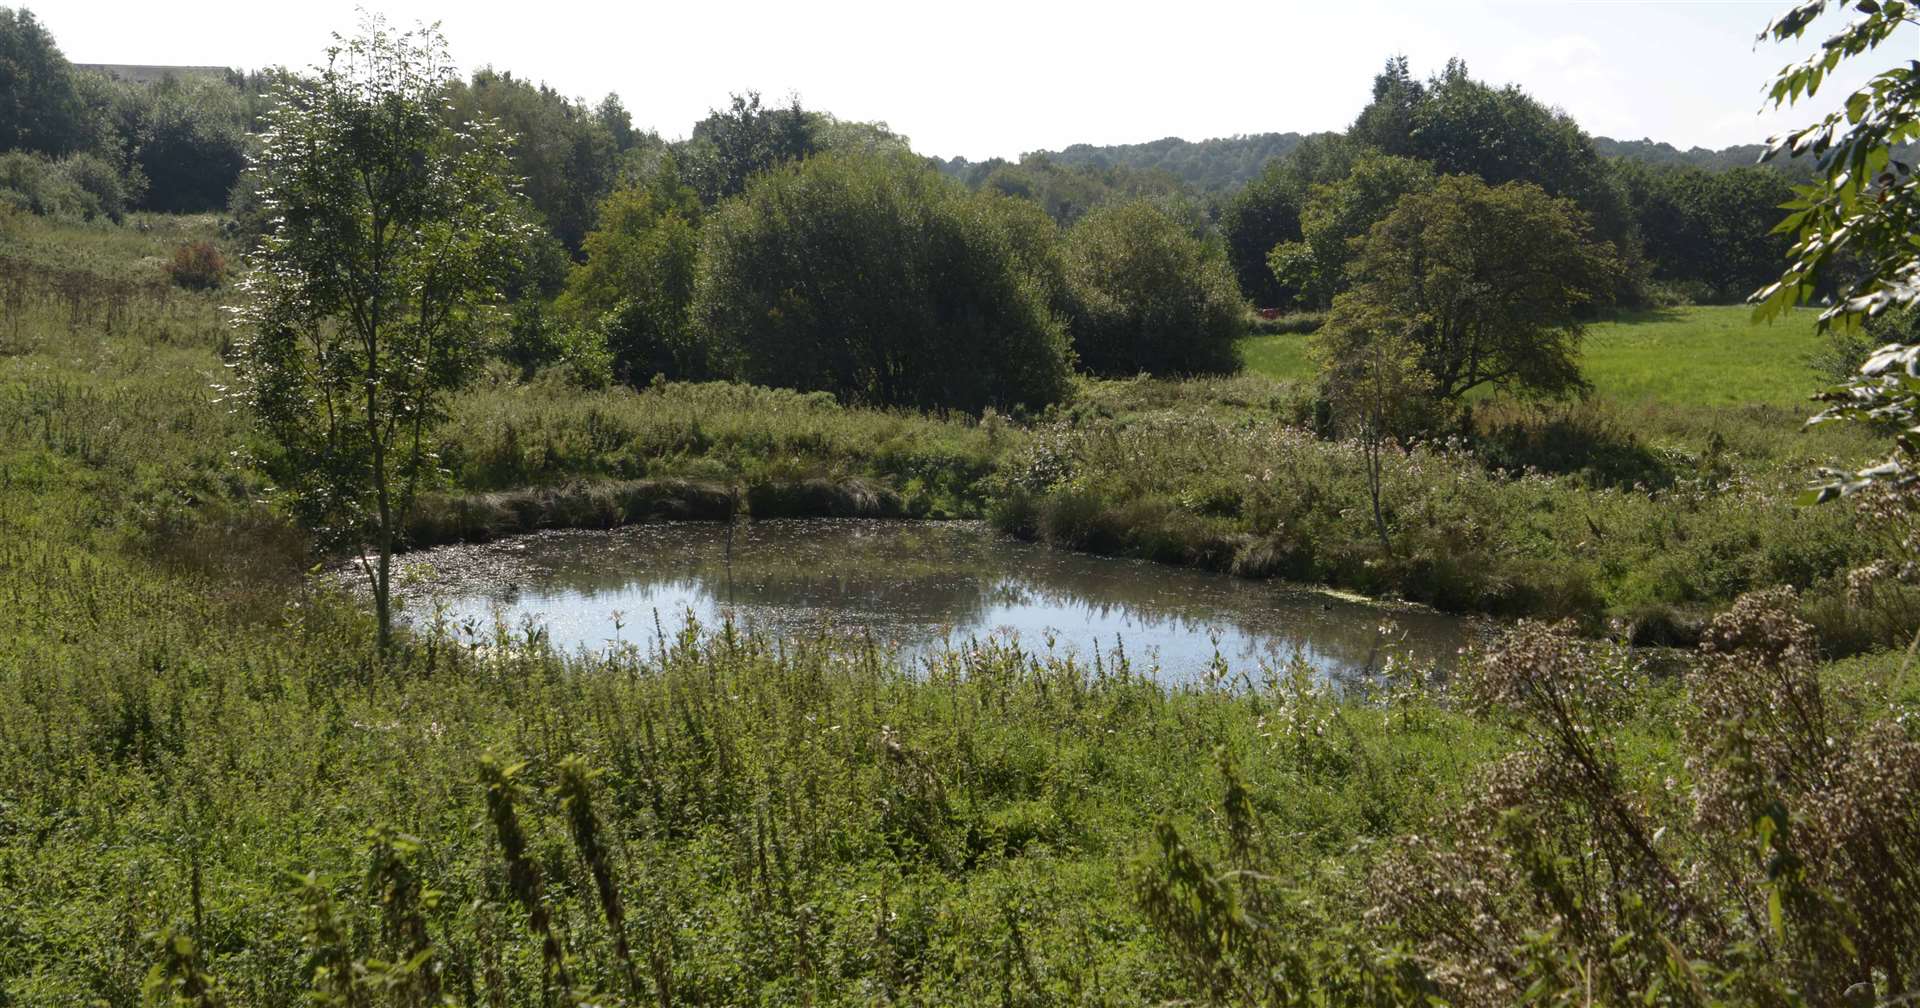 One of the existing lakes on the site